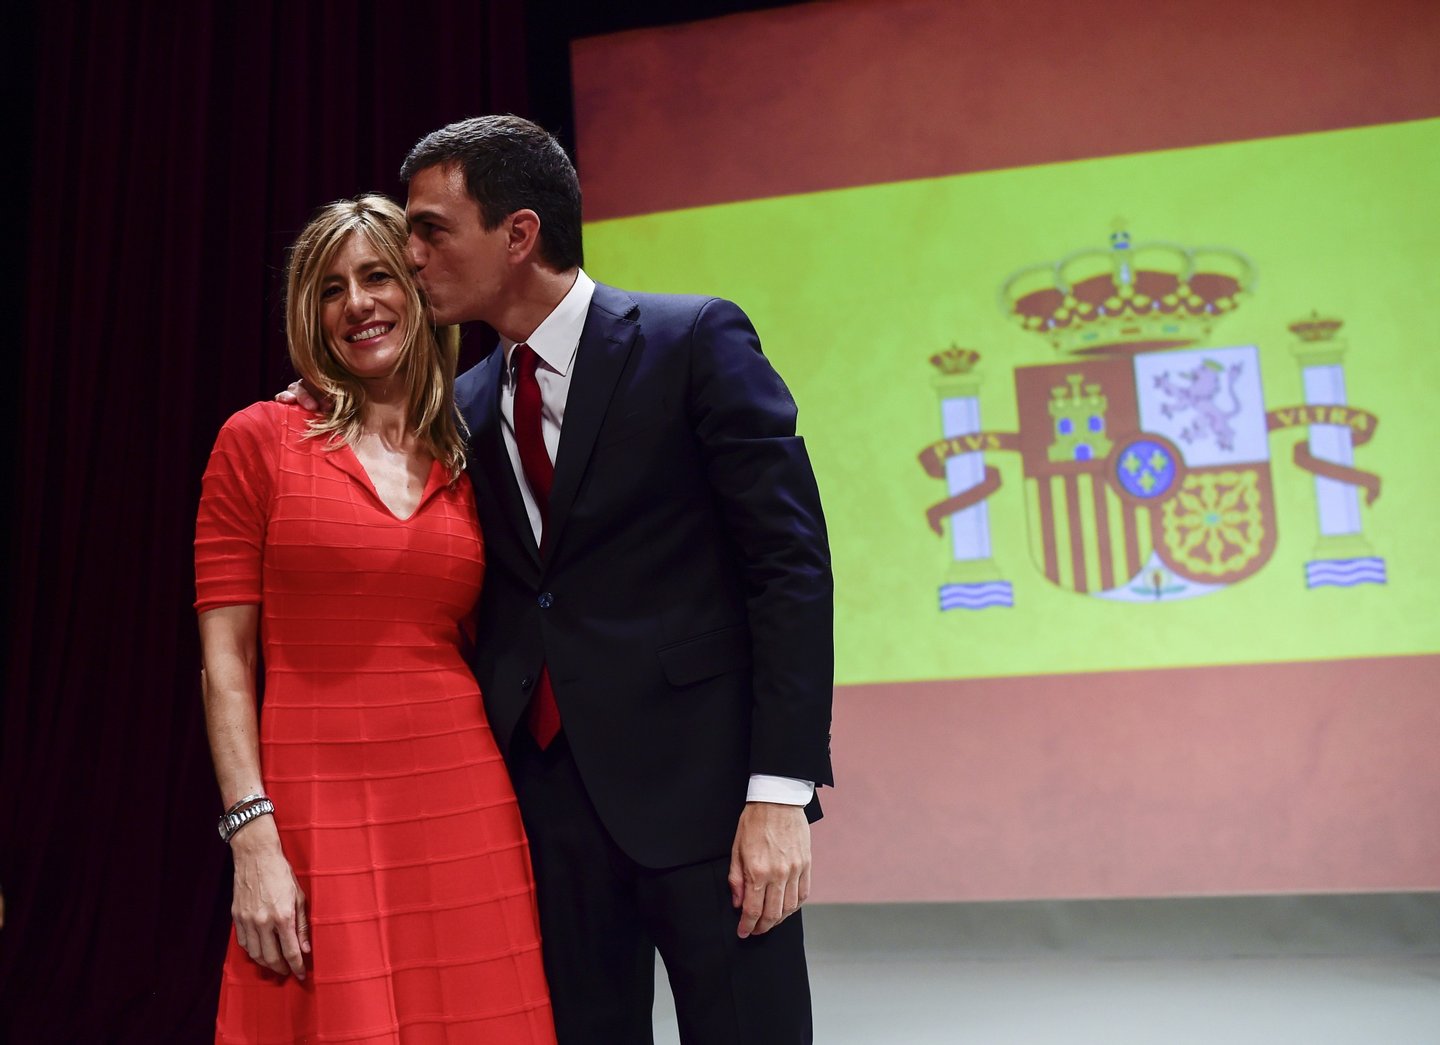 Secretary general of Spanish Socialist Party (PSOE) Pedro Sanchez (R) kisses his wife Begona Fernandez after delivering a speech during his official presentation as PSOE candidate for next general elections, at the Price Circus in Madrid on June 21, 2015. AFP PHOTO/ DANI POZO (Photo credit should read DANI POZO/AFP/Getty Images)